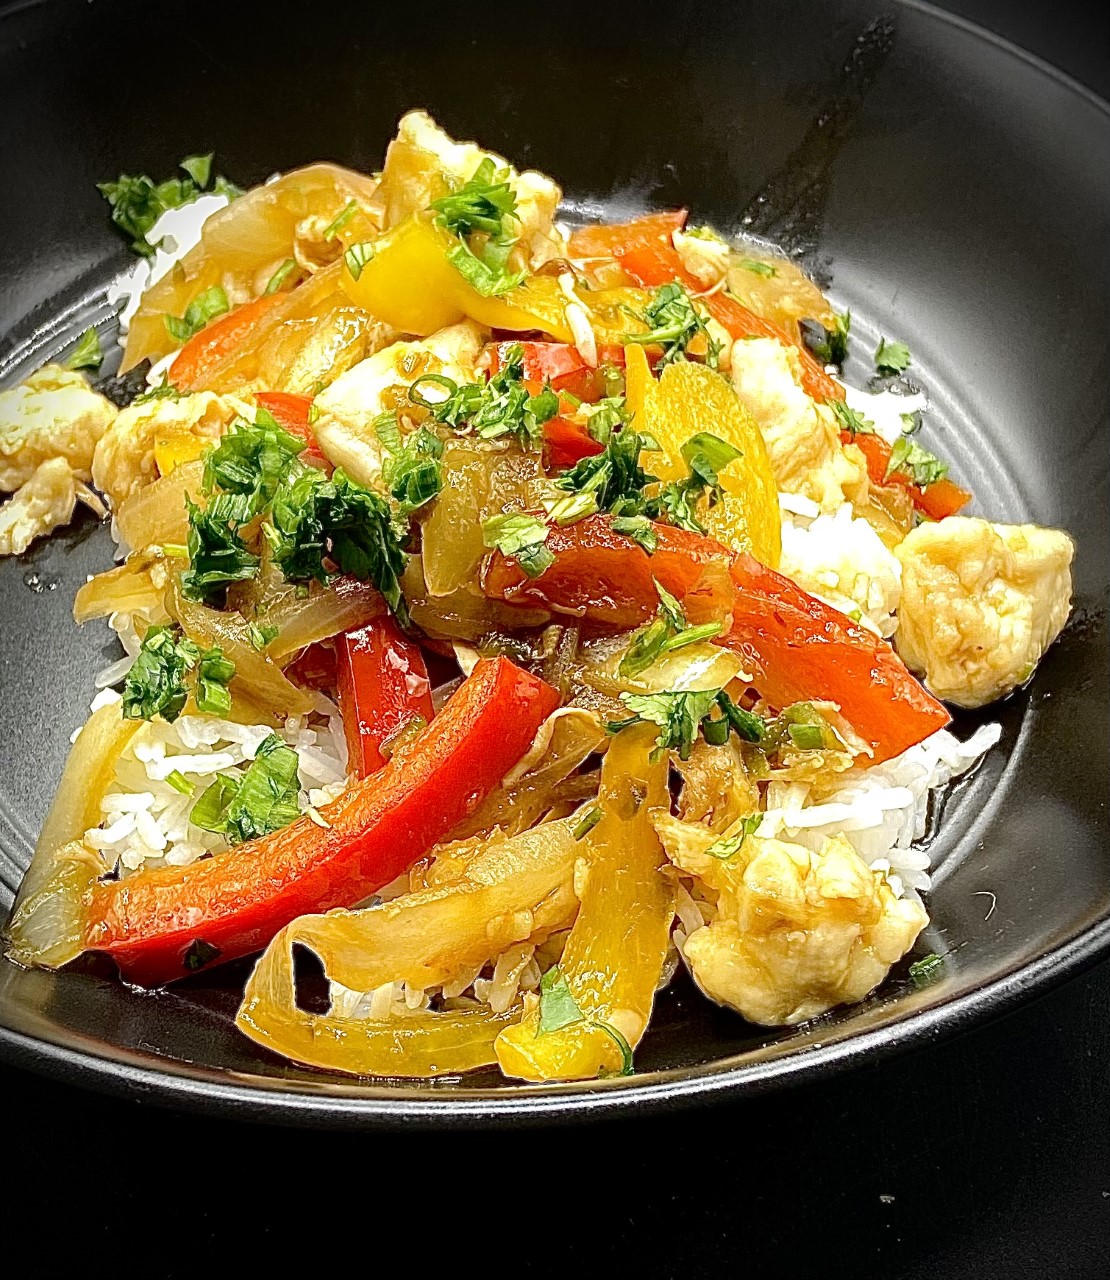 Chicken and Pepper Stir-Fry with Homemade Garlic Chili Sauce